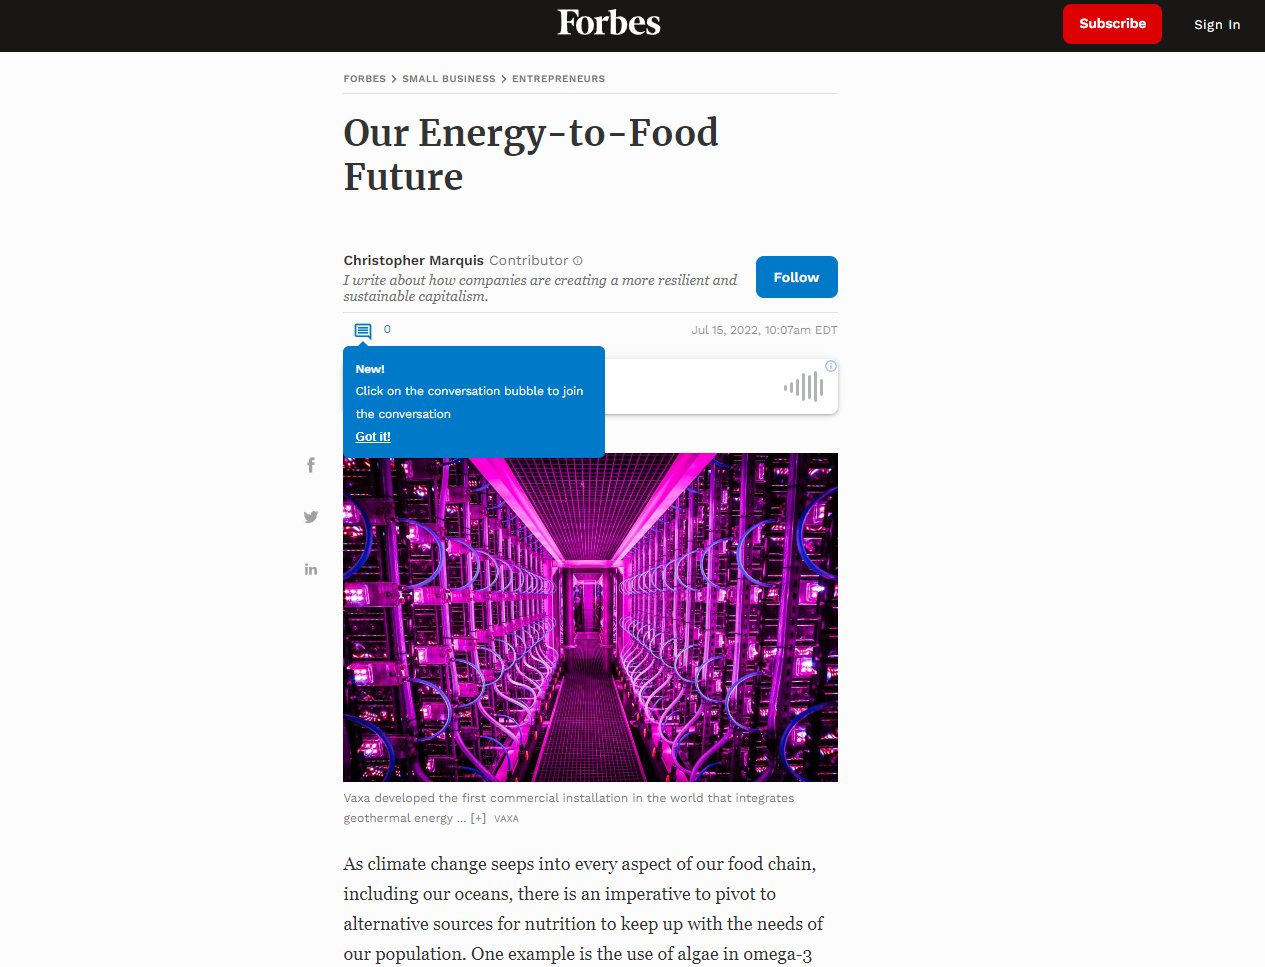 Our Energy-to-Food Future